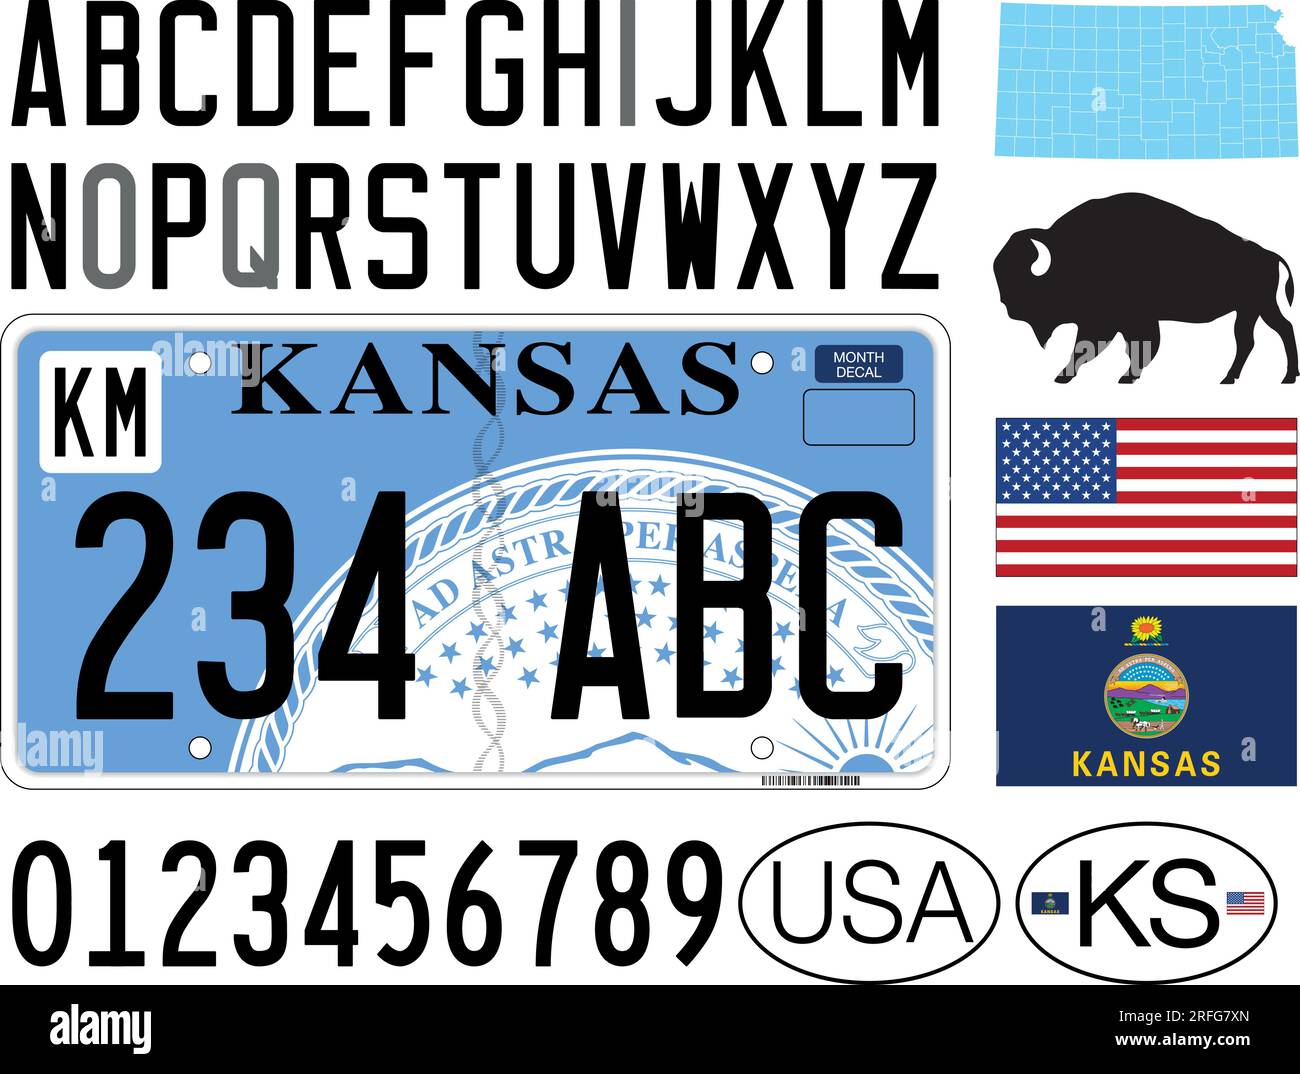 Kansas state car license plate pattern, letters, numbers and symbols, vector illustration, USA Stock Vector